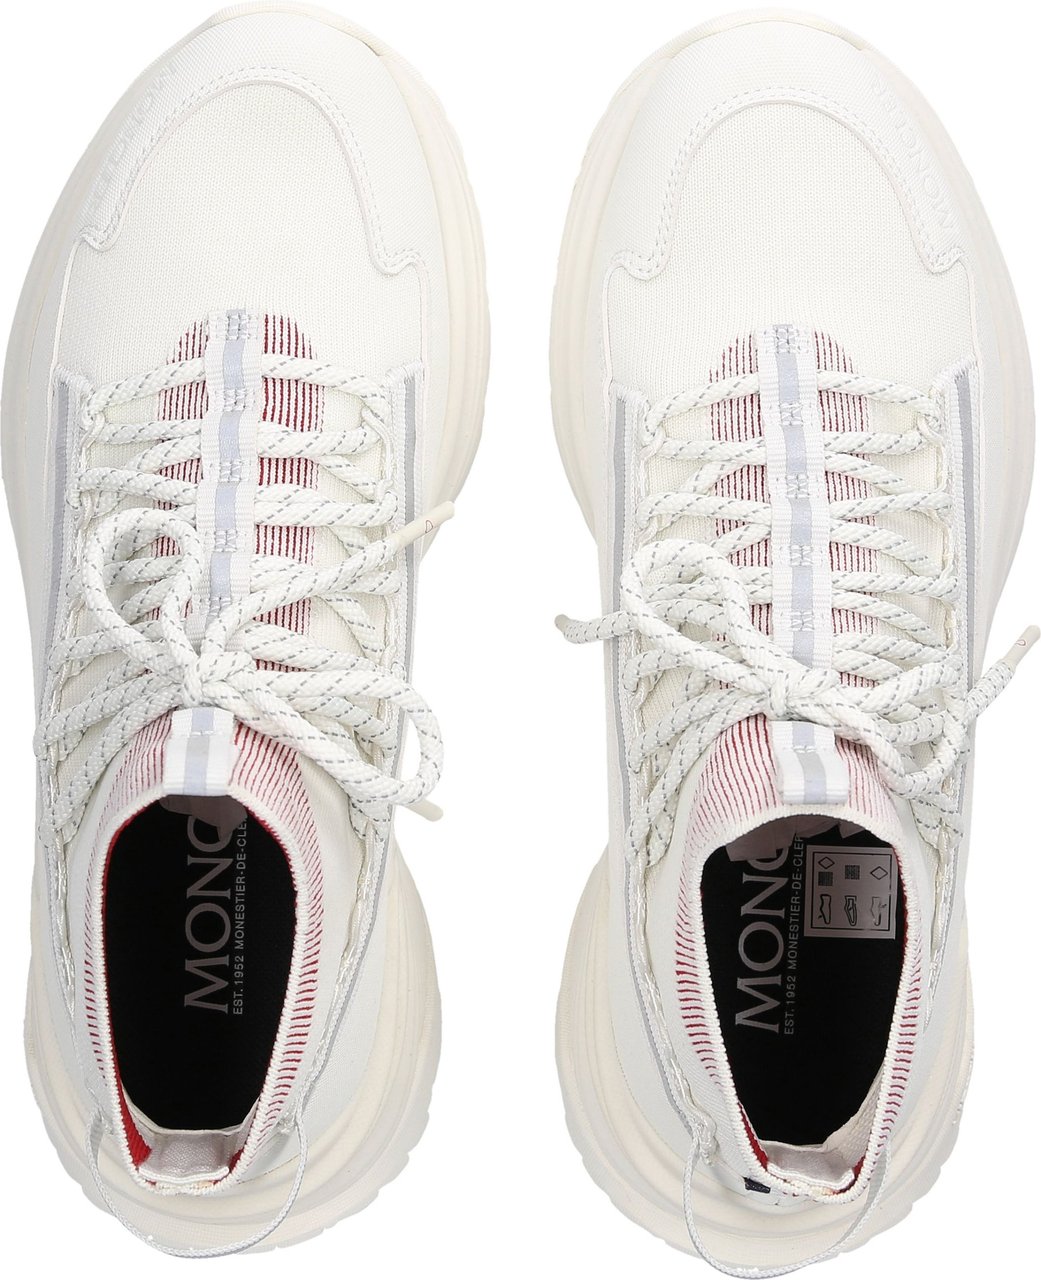 Moncler High-top Sneakers Light Runner Fabric Mix Pearl Wit